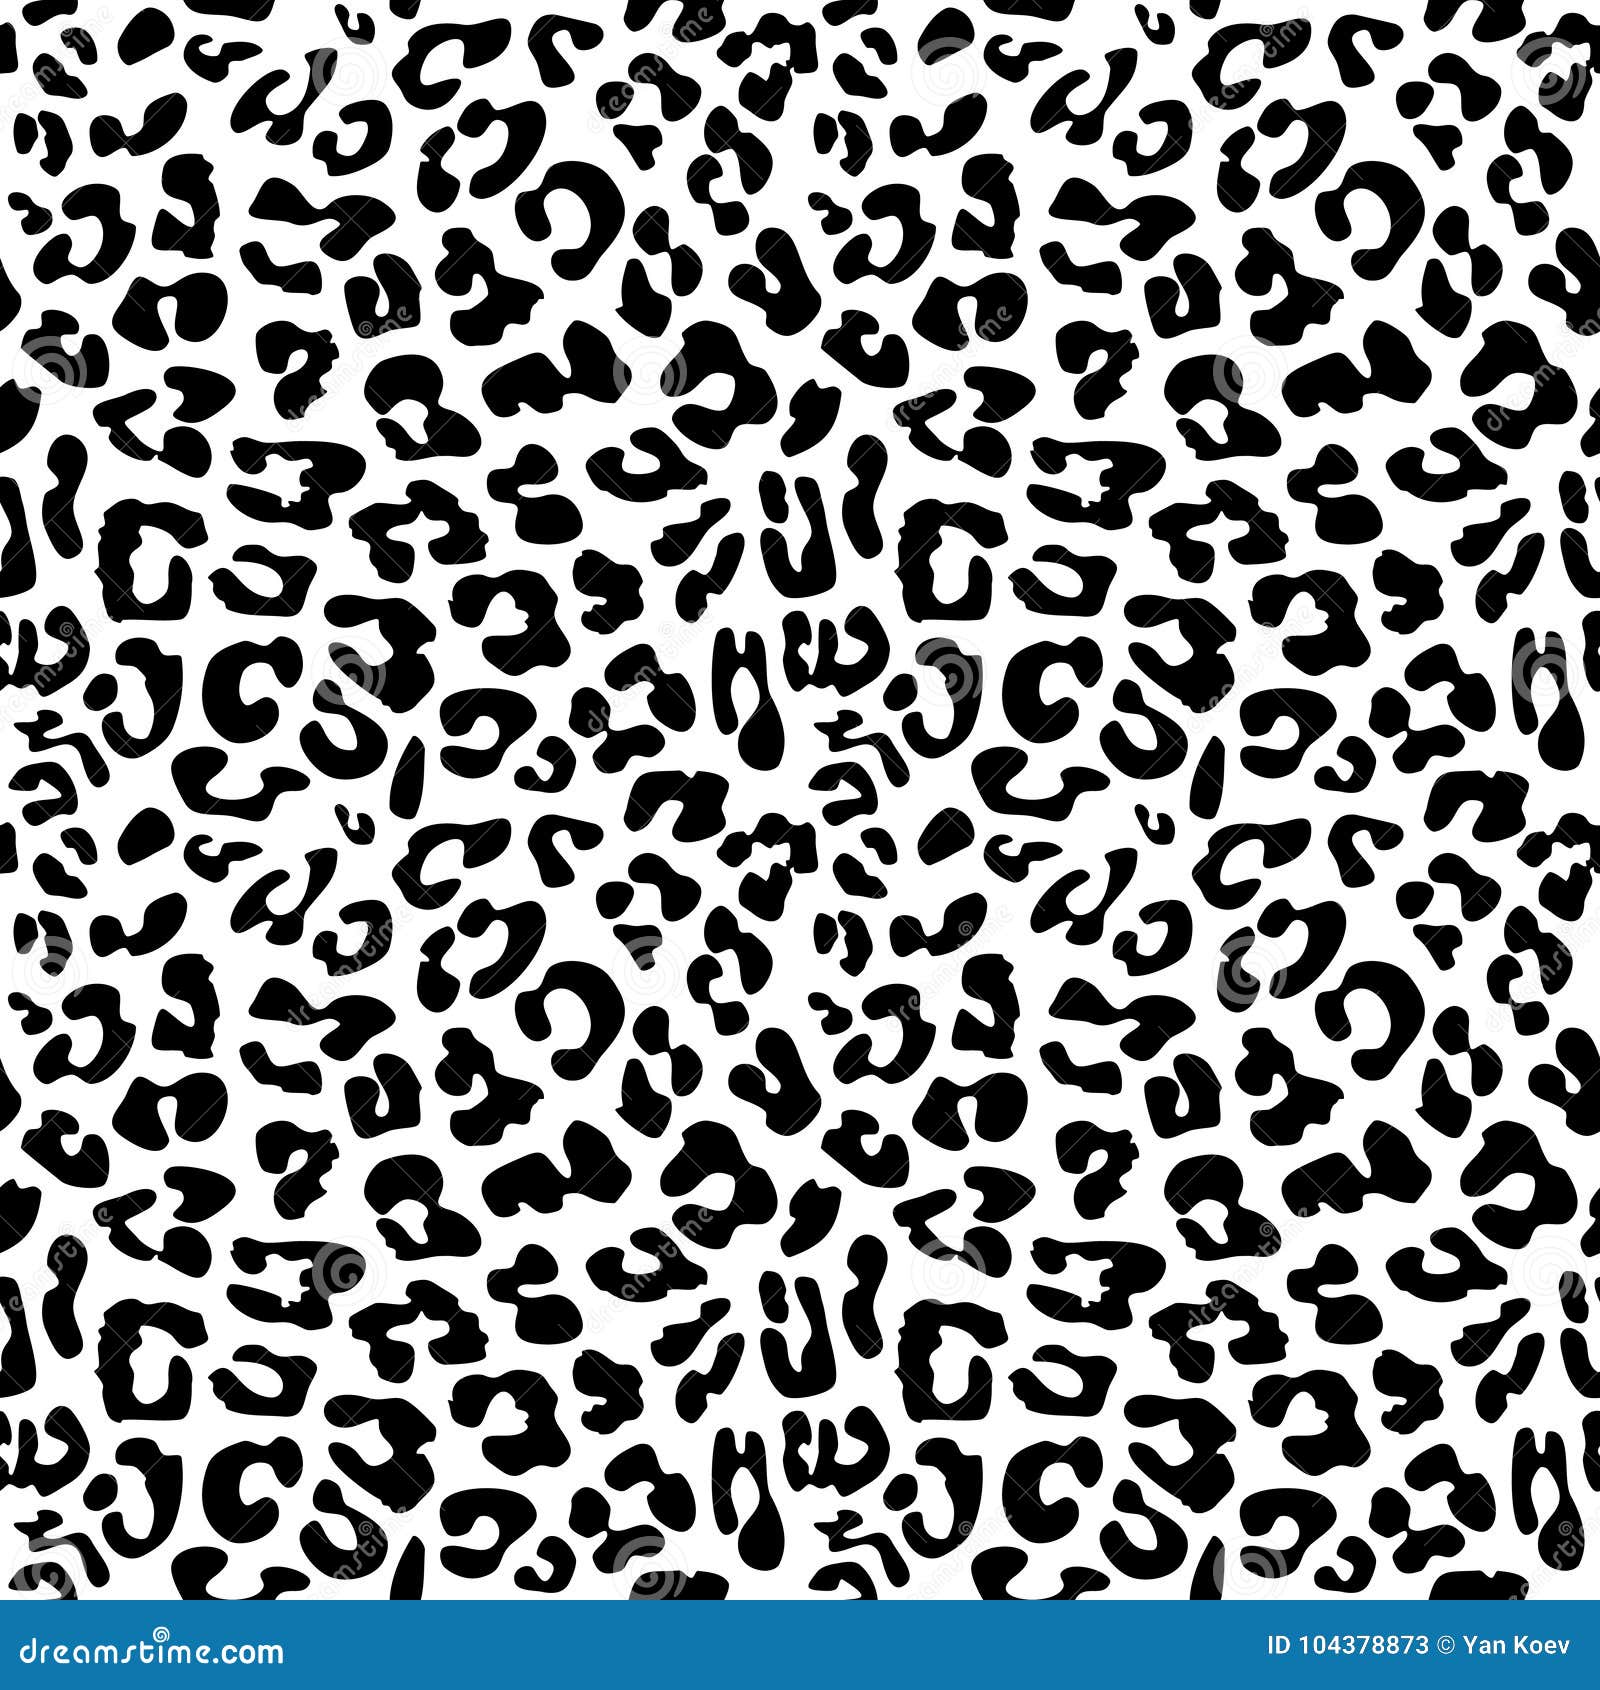 Leopard Skin Repeated Seamless Pattern Texture. Stock Vector ...